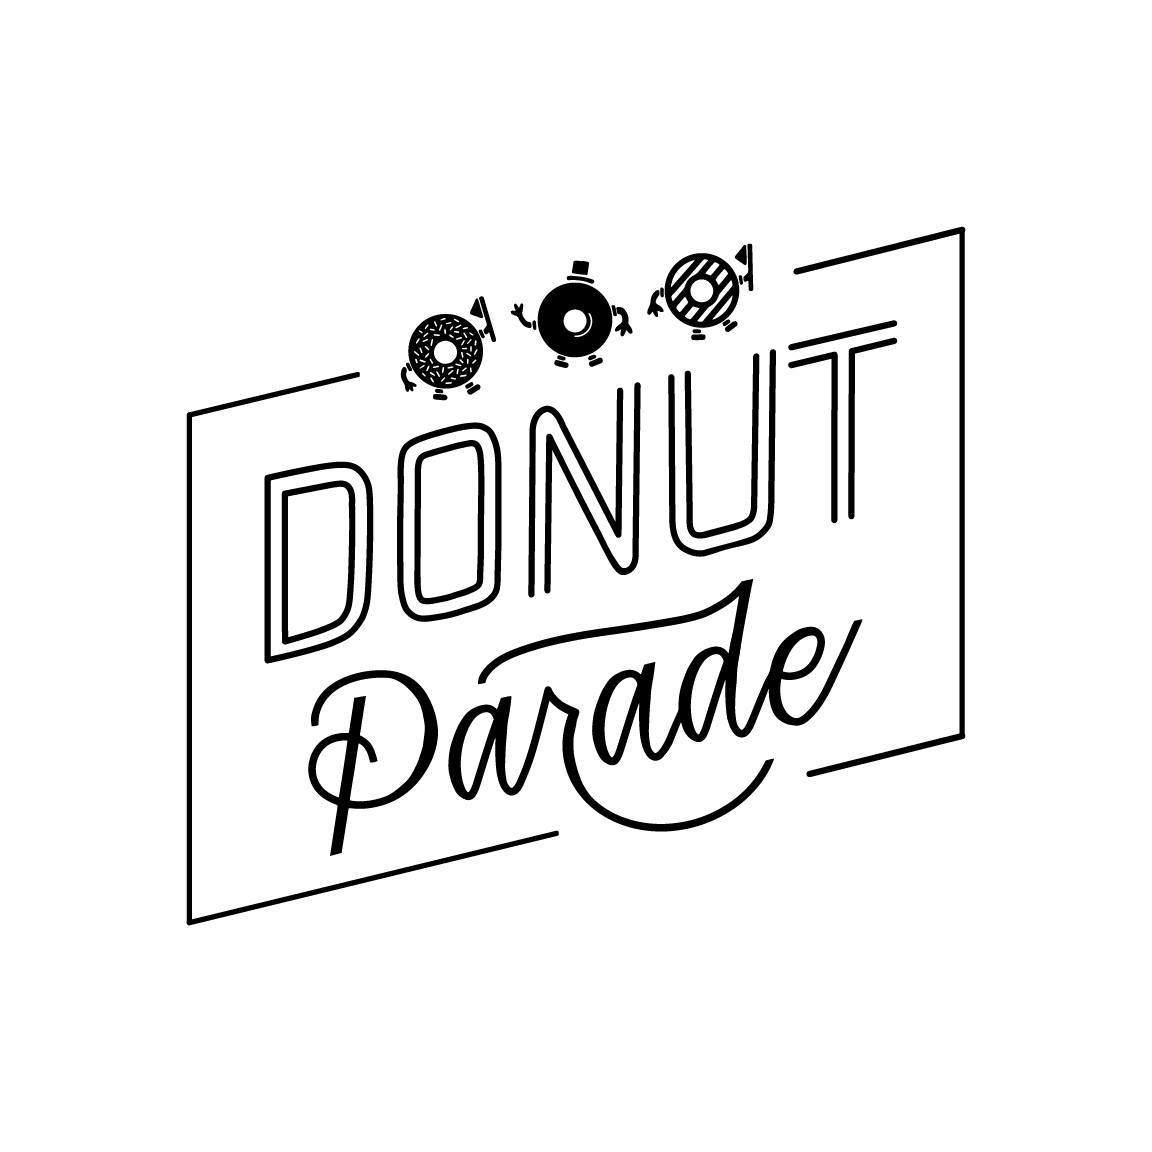 Donut Parade | Go grab yourself a yummy treat!